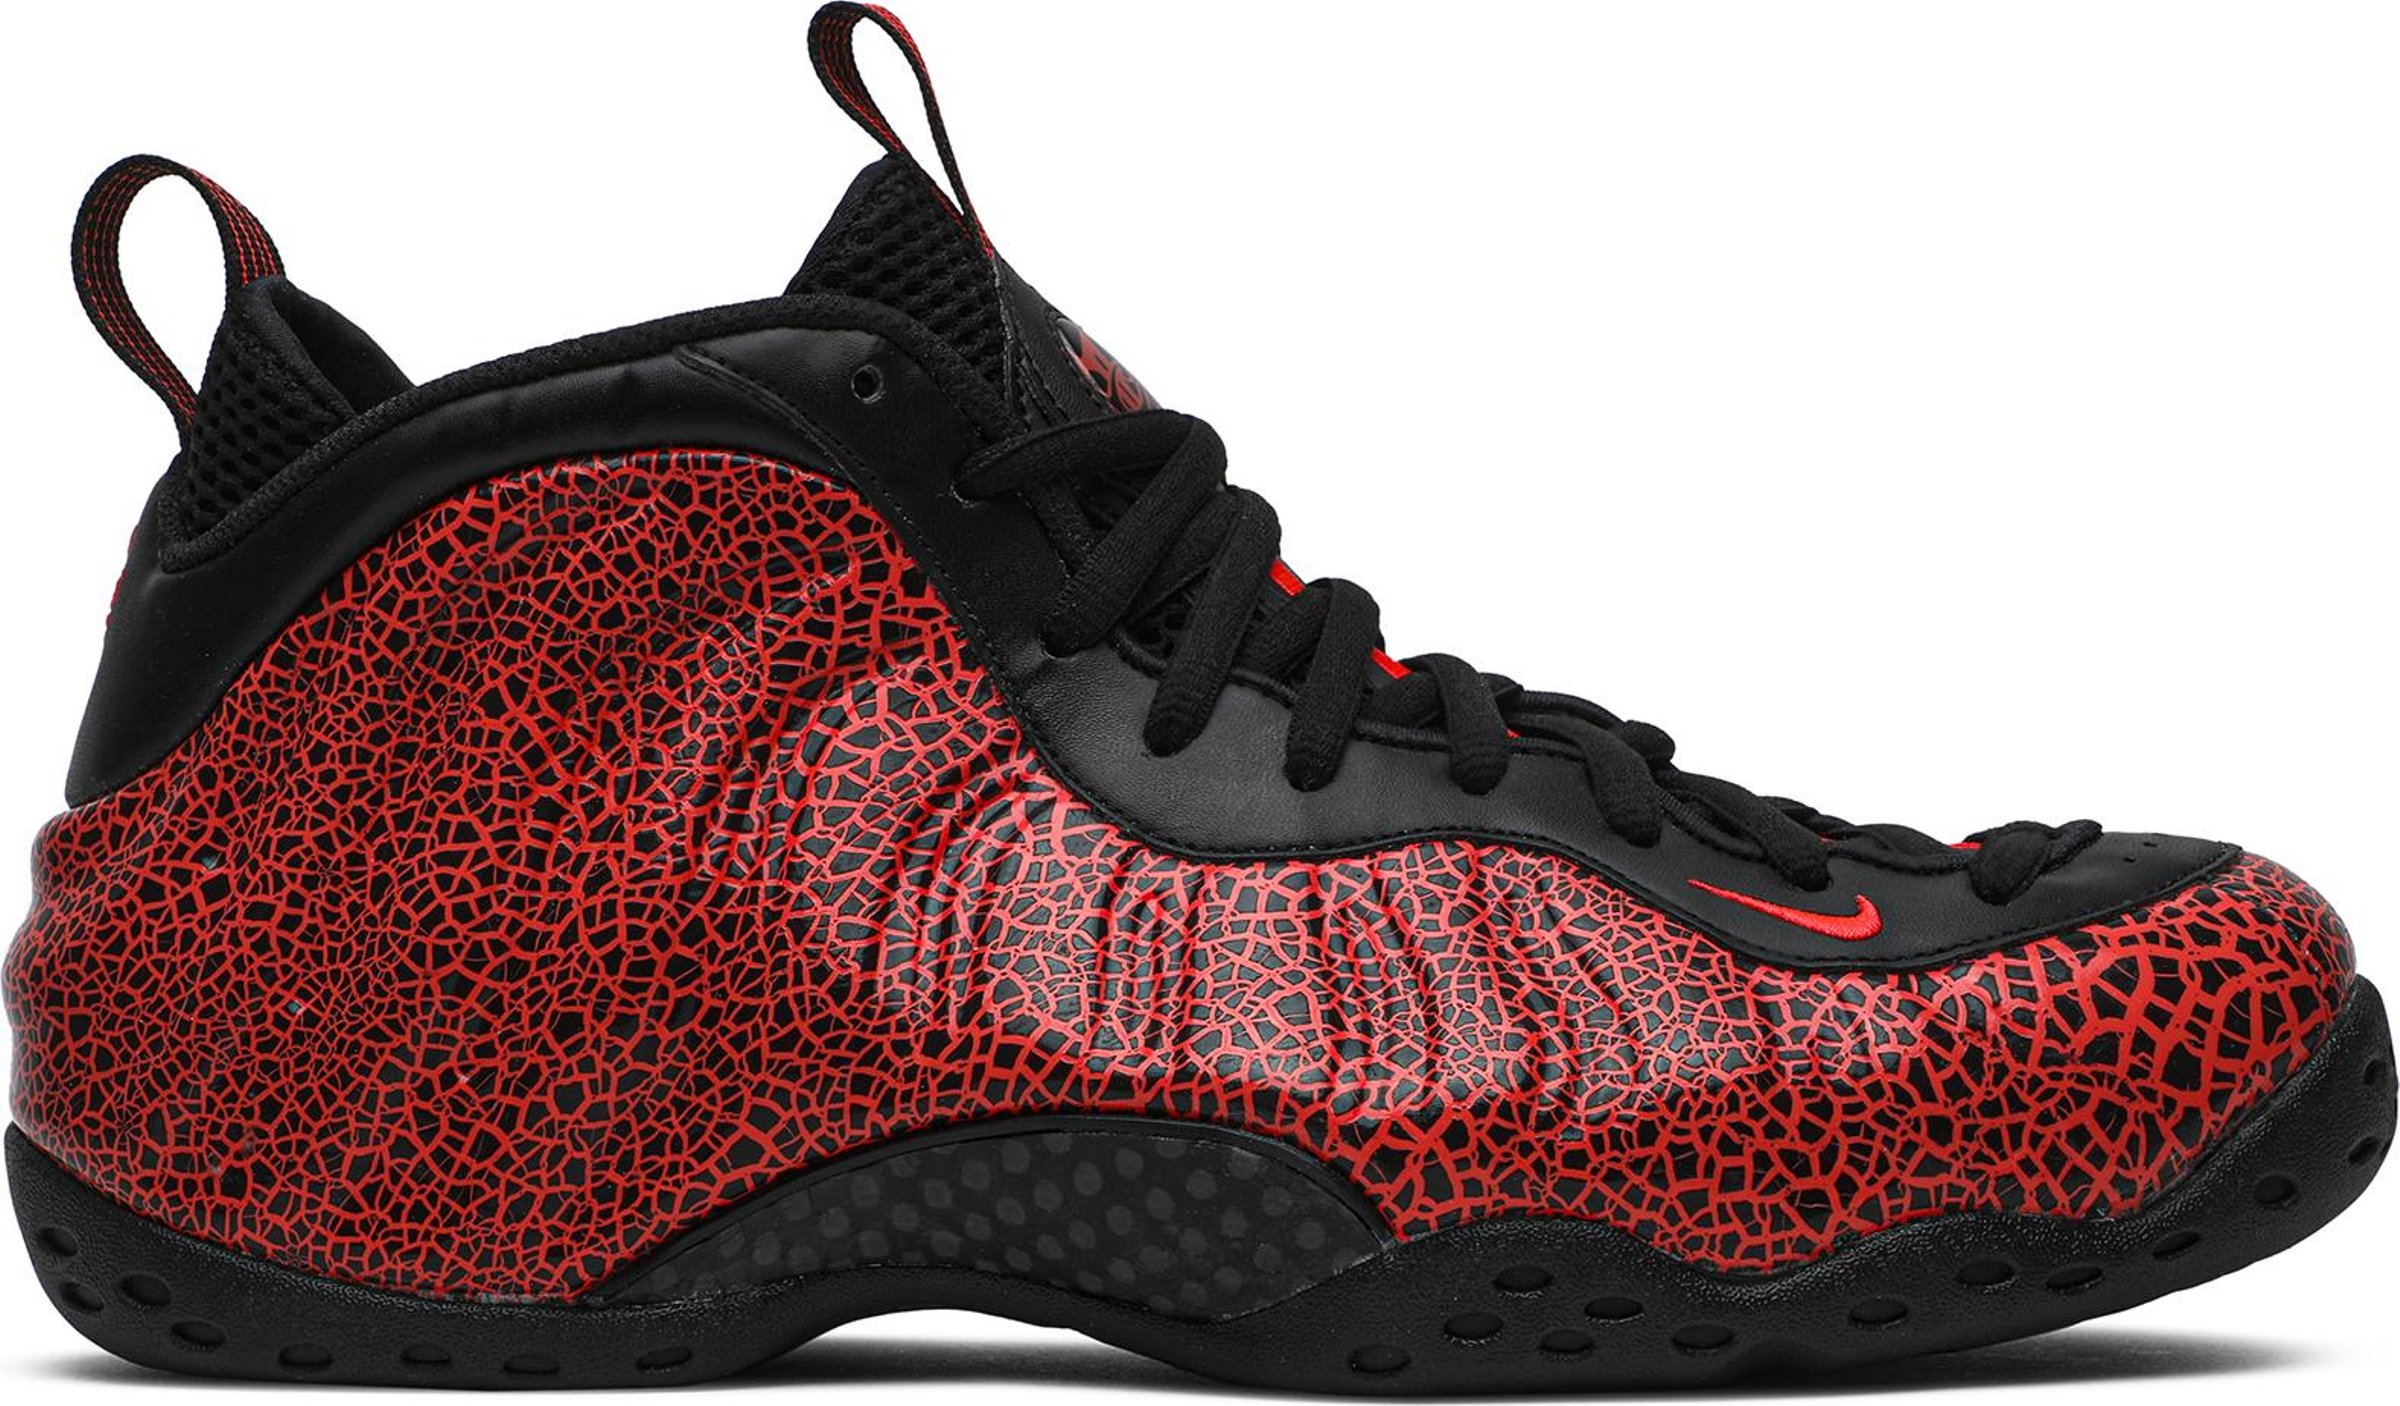 Buy Air Foamposite One 'Cracked Lava' - 314996 014 | GOAT